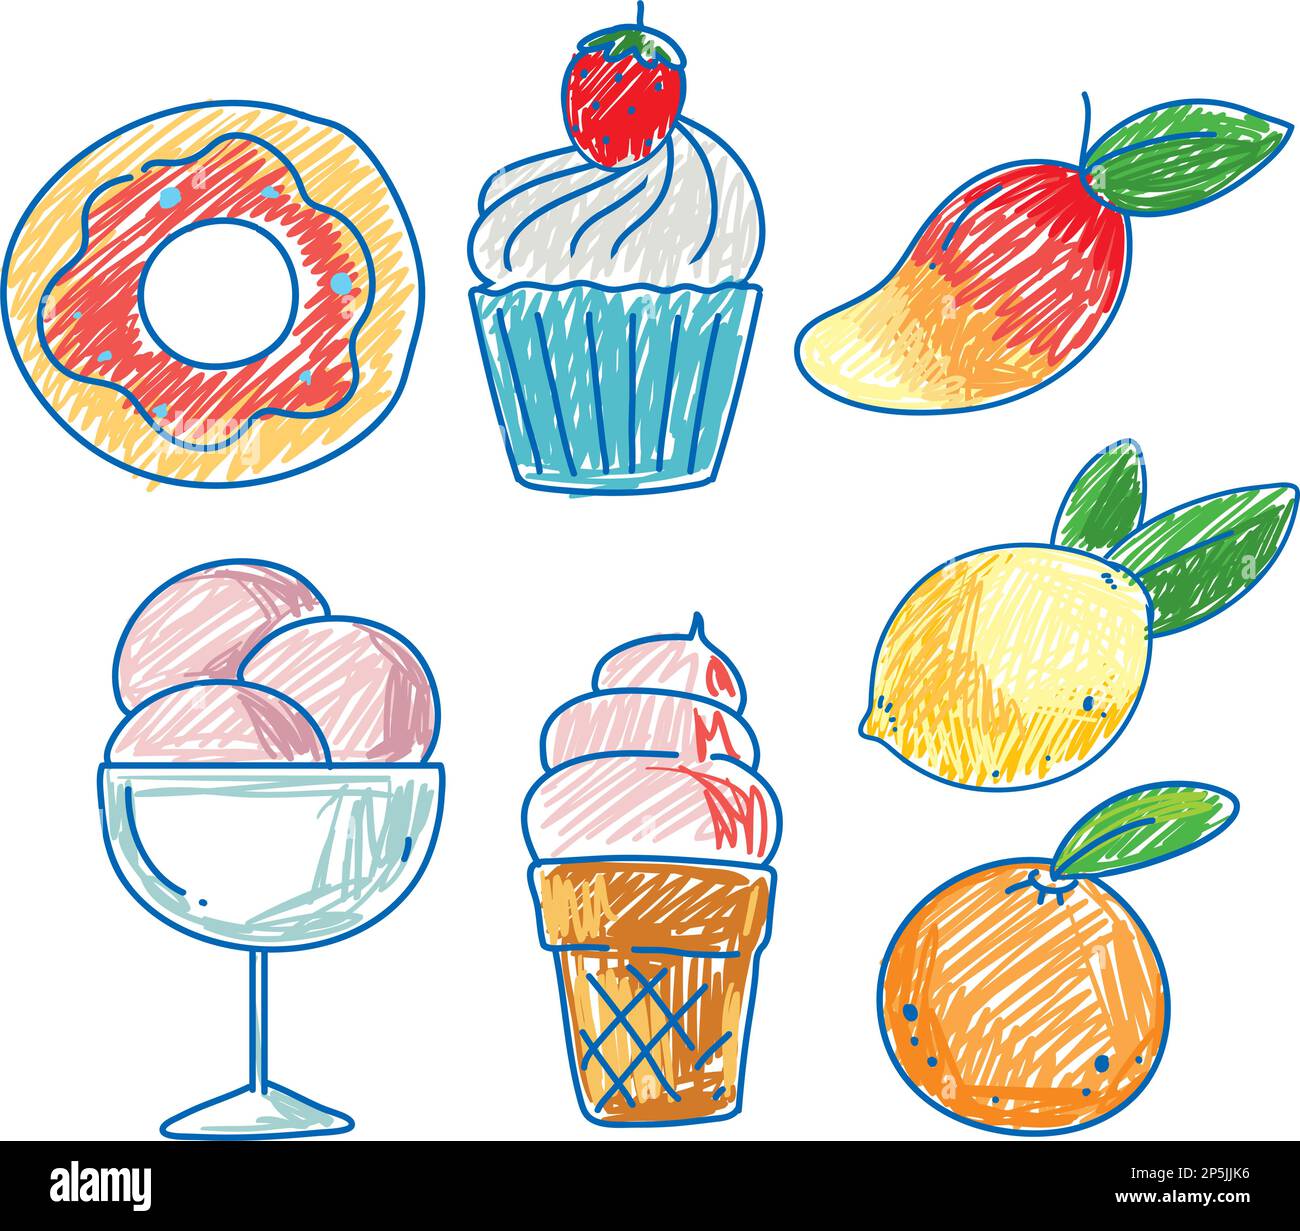 Simple children scribble of fruit and sweets illustration Stock Vector